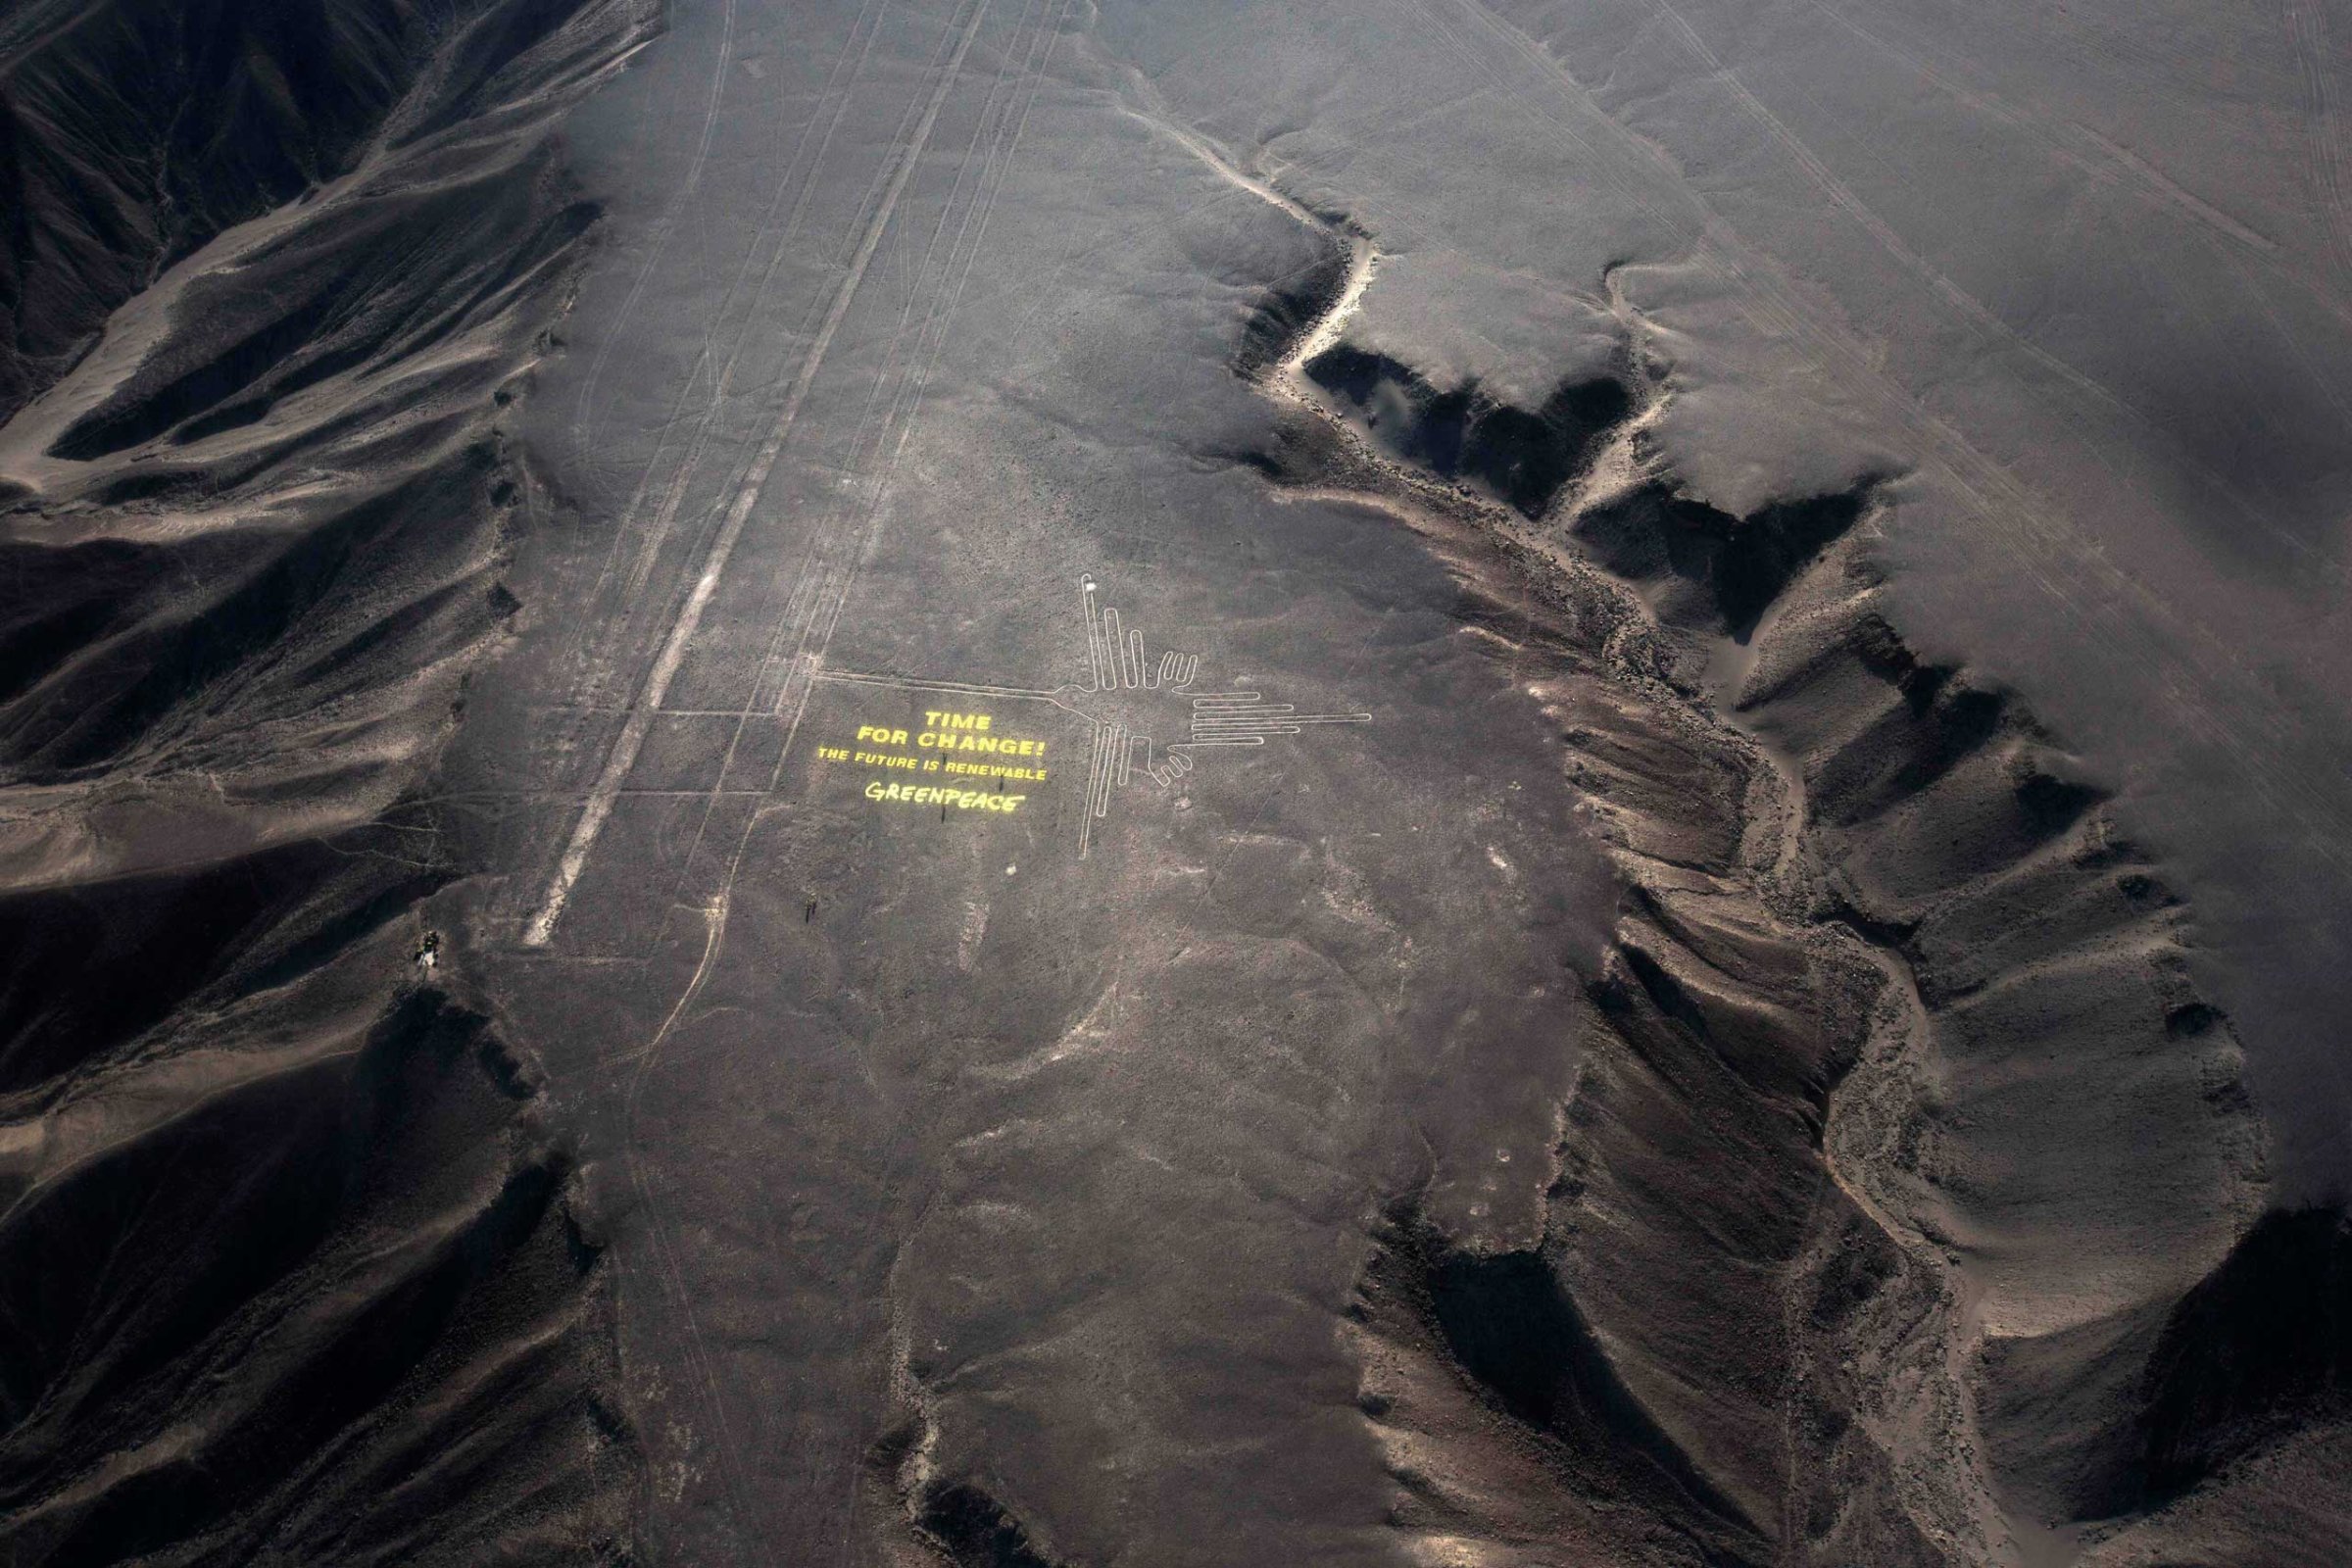 Greenpeace activists stand next to massive letters delivering the message "Time for Change: The Future is Renewable," next to the hummingbird geoglyph in Nazca in Peru,, Dec. 8, 2014.